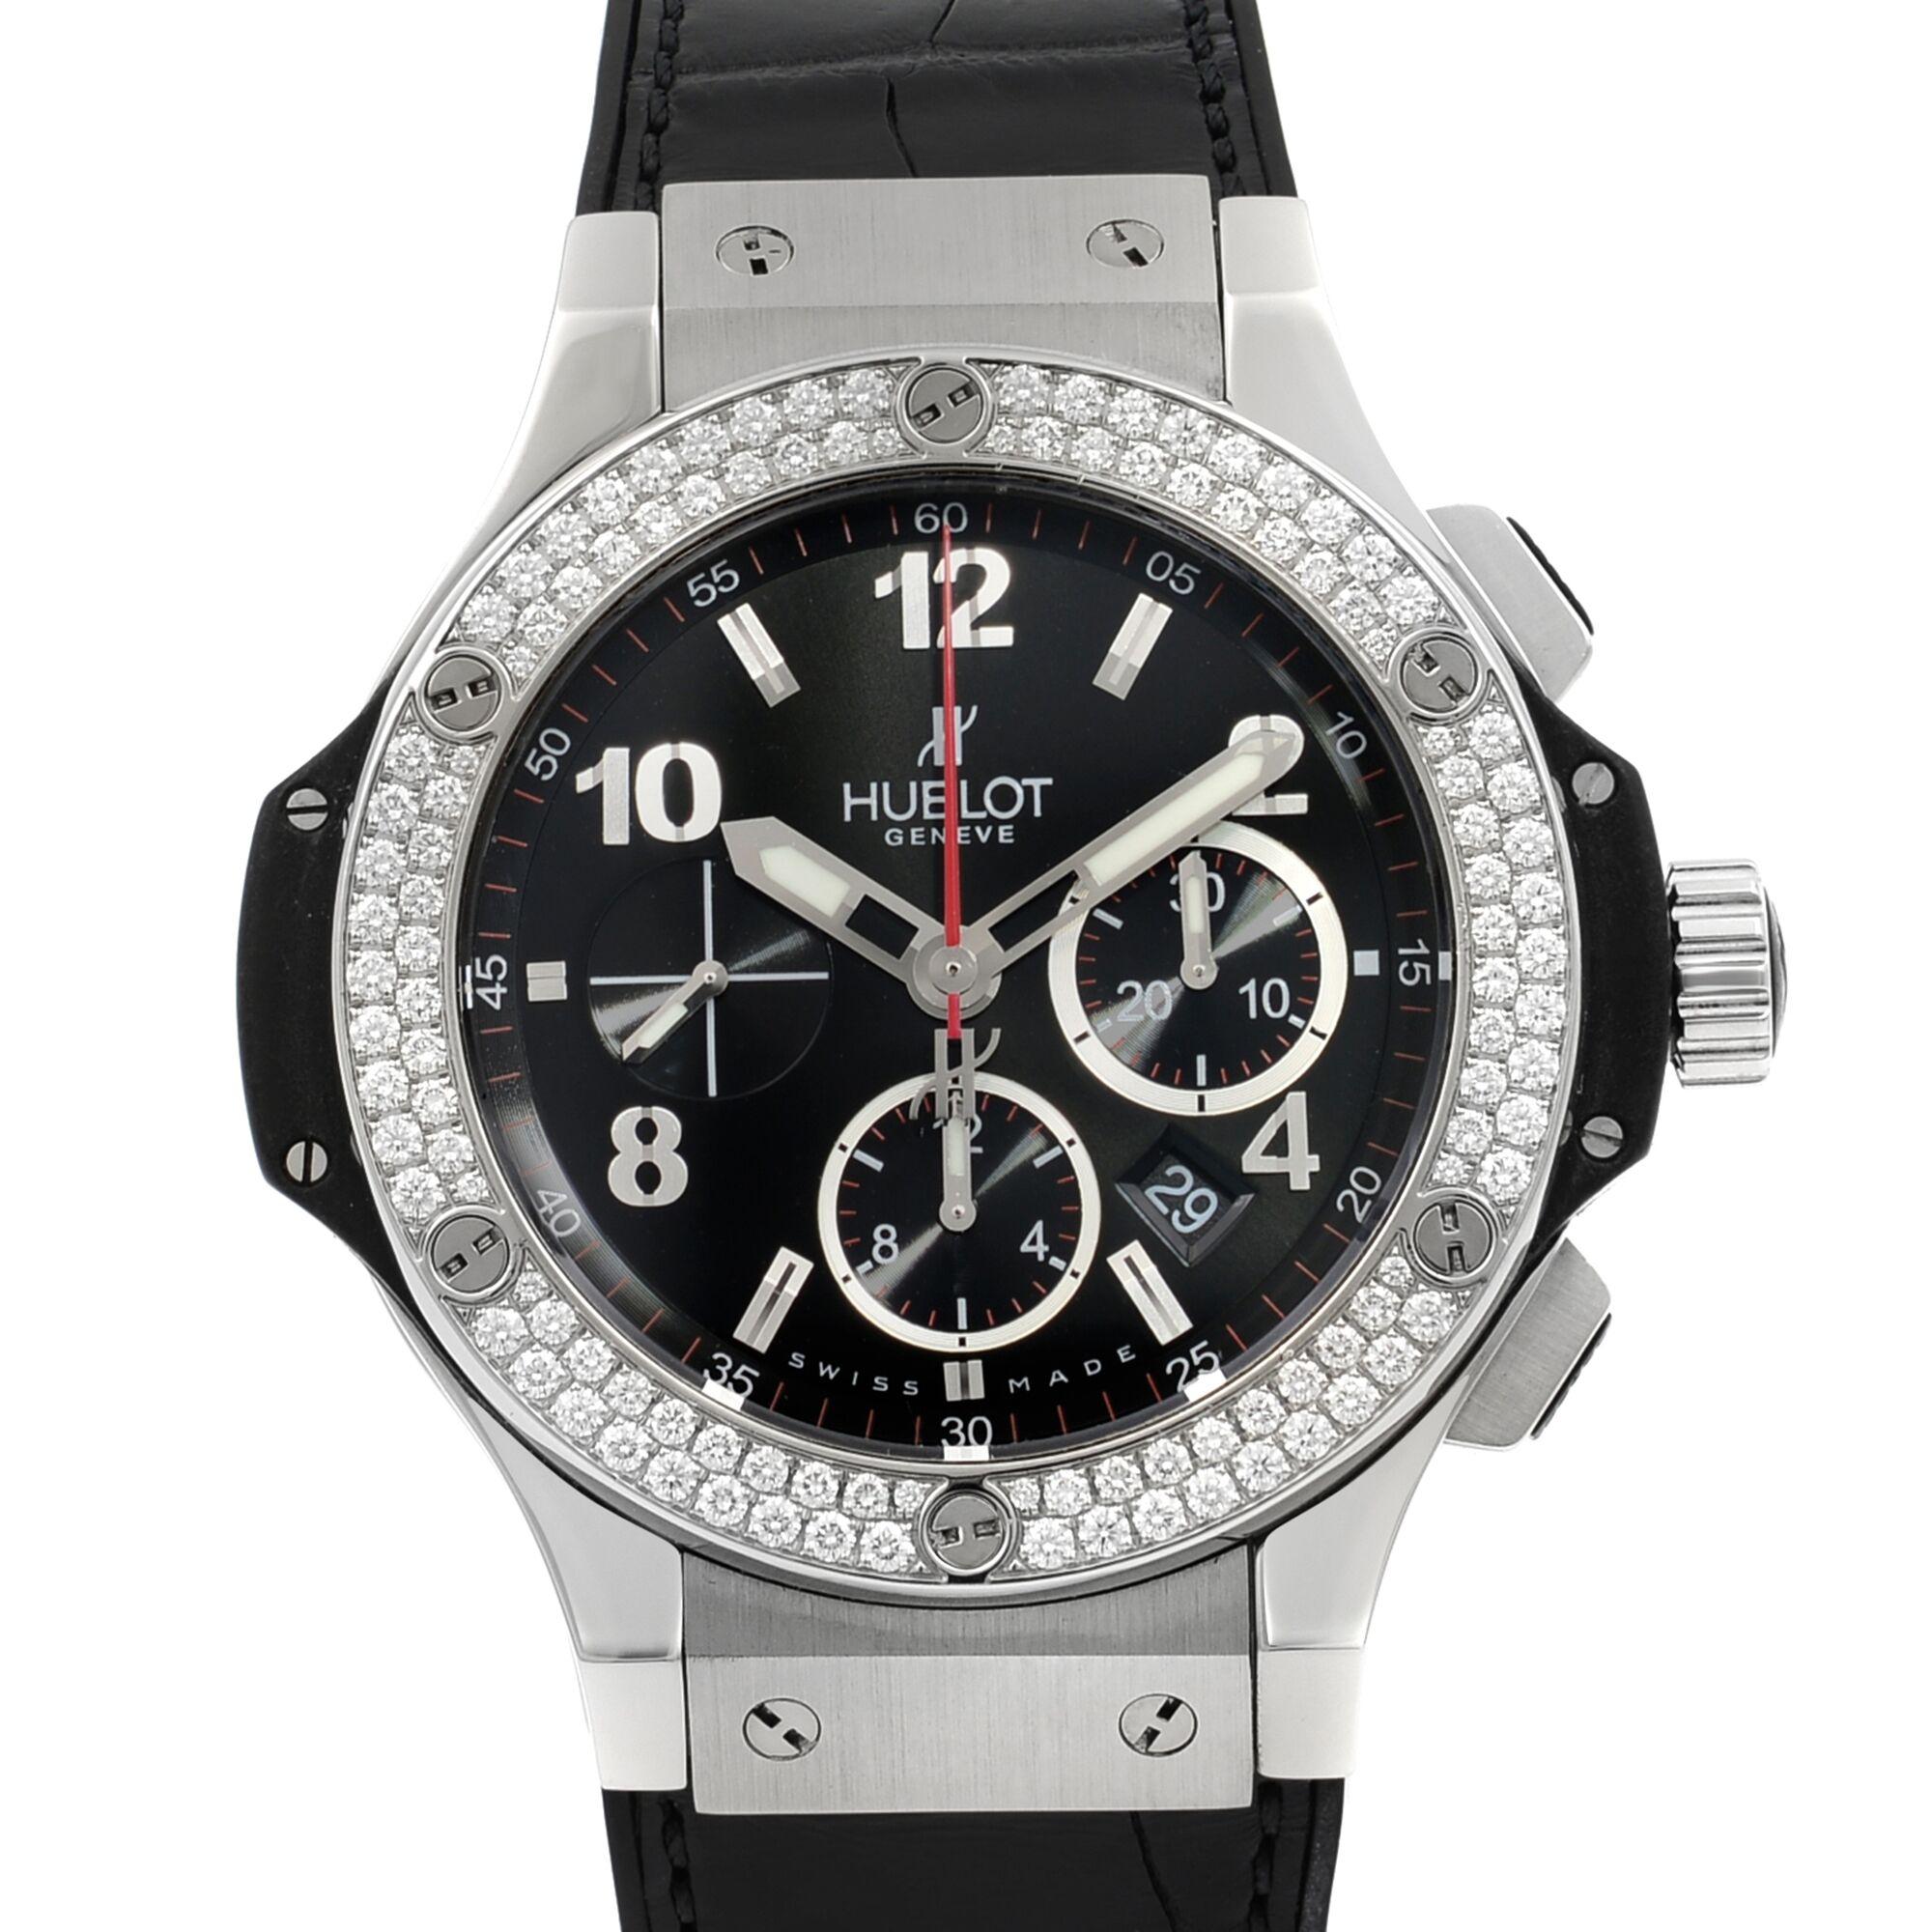 This pre-owned Hublot Big Bang 301.SX.130.RX is a beautiful men's timepiece that is powered by mechanical (automatic) movement which is cased in a stainless steel case. It has a round shape face, chronograph, chronograph hand, date indicator, small